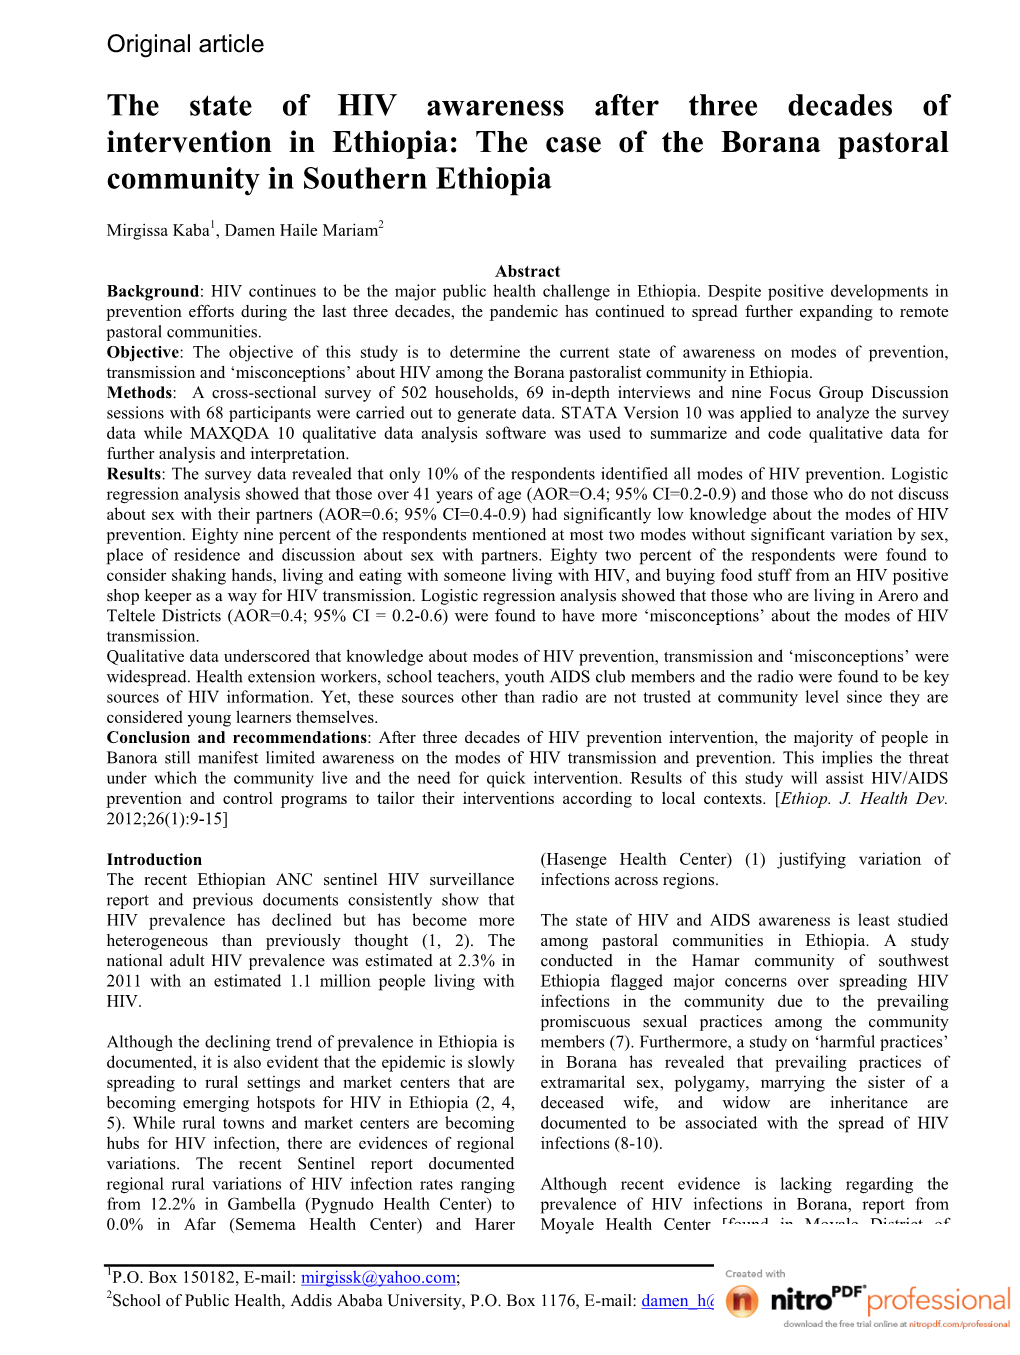 The State of HIV Awareness After Three Decades of Intervention in Ethiopia: the Case of the Borana Pastoral Community in Southern Ethiopia